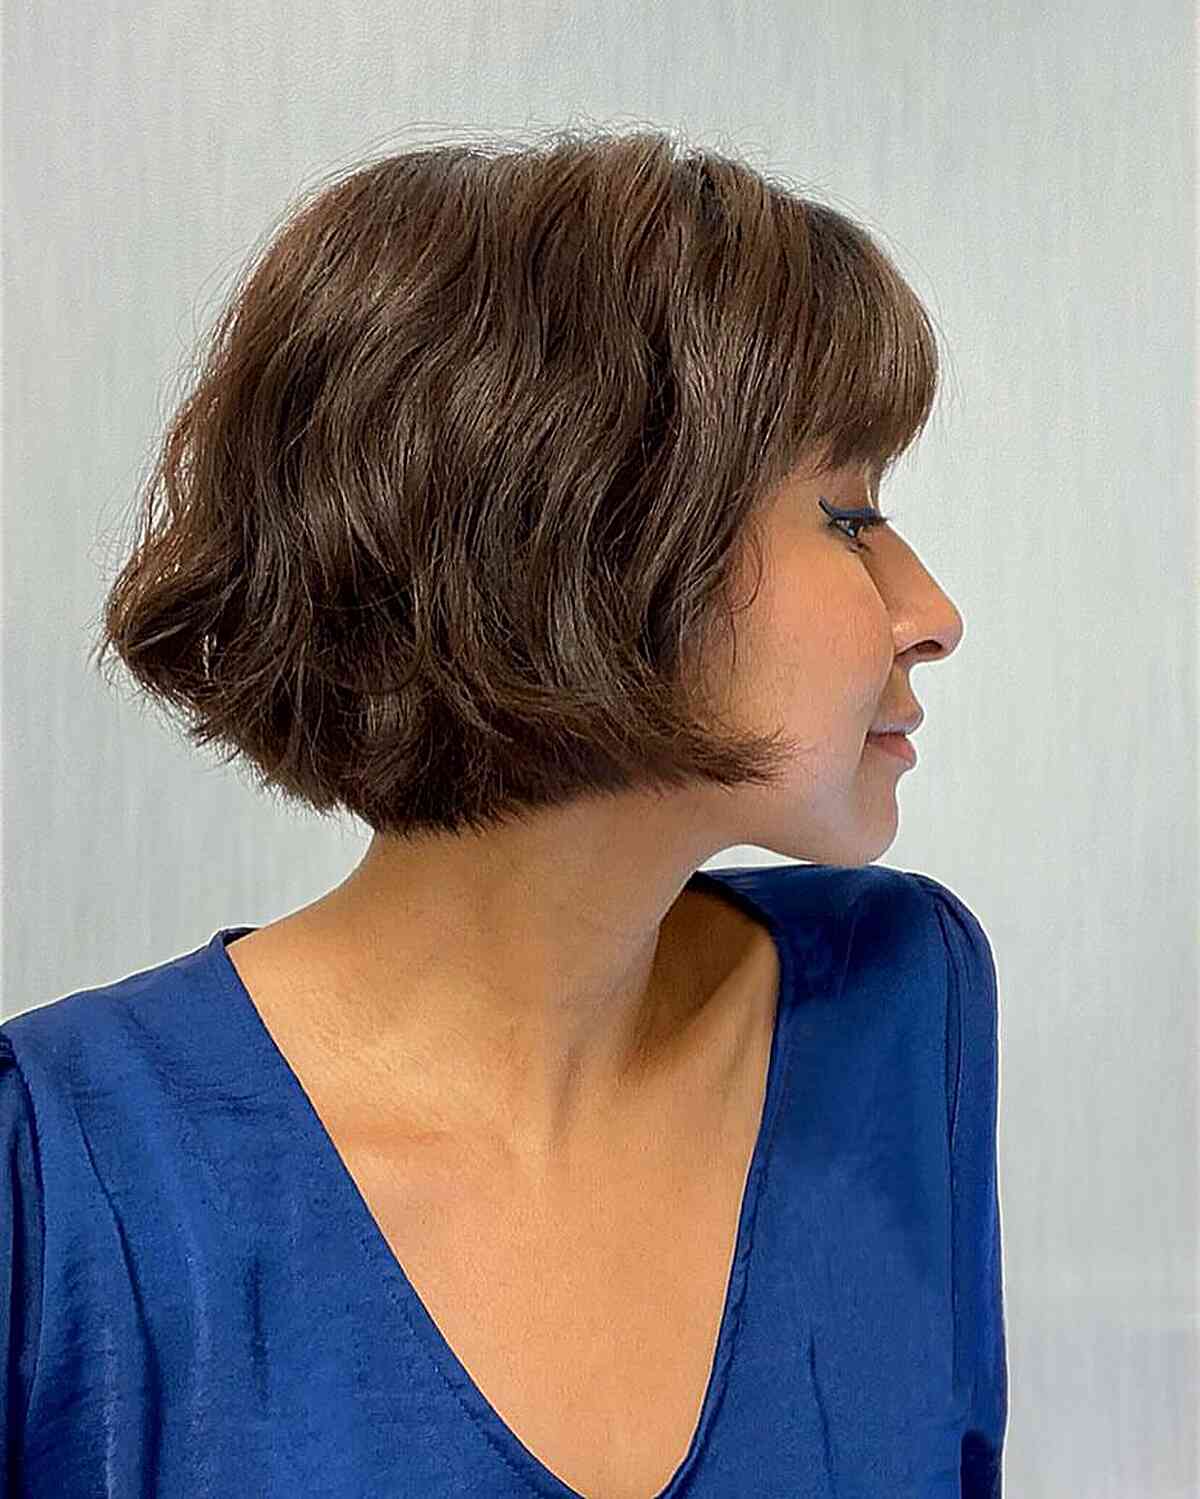 Short Bouncy Bobbed Thick Hair with Fringe